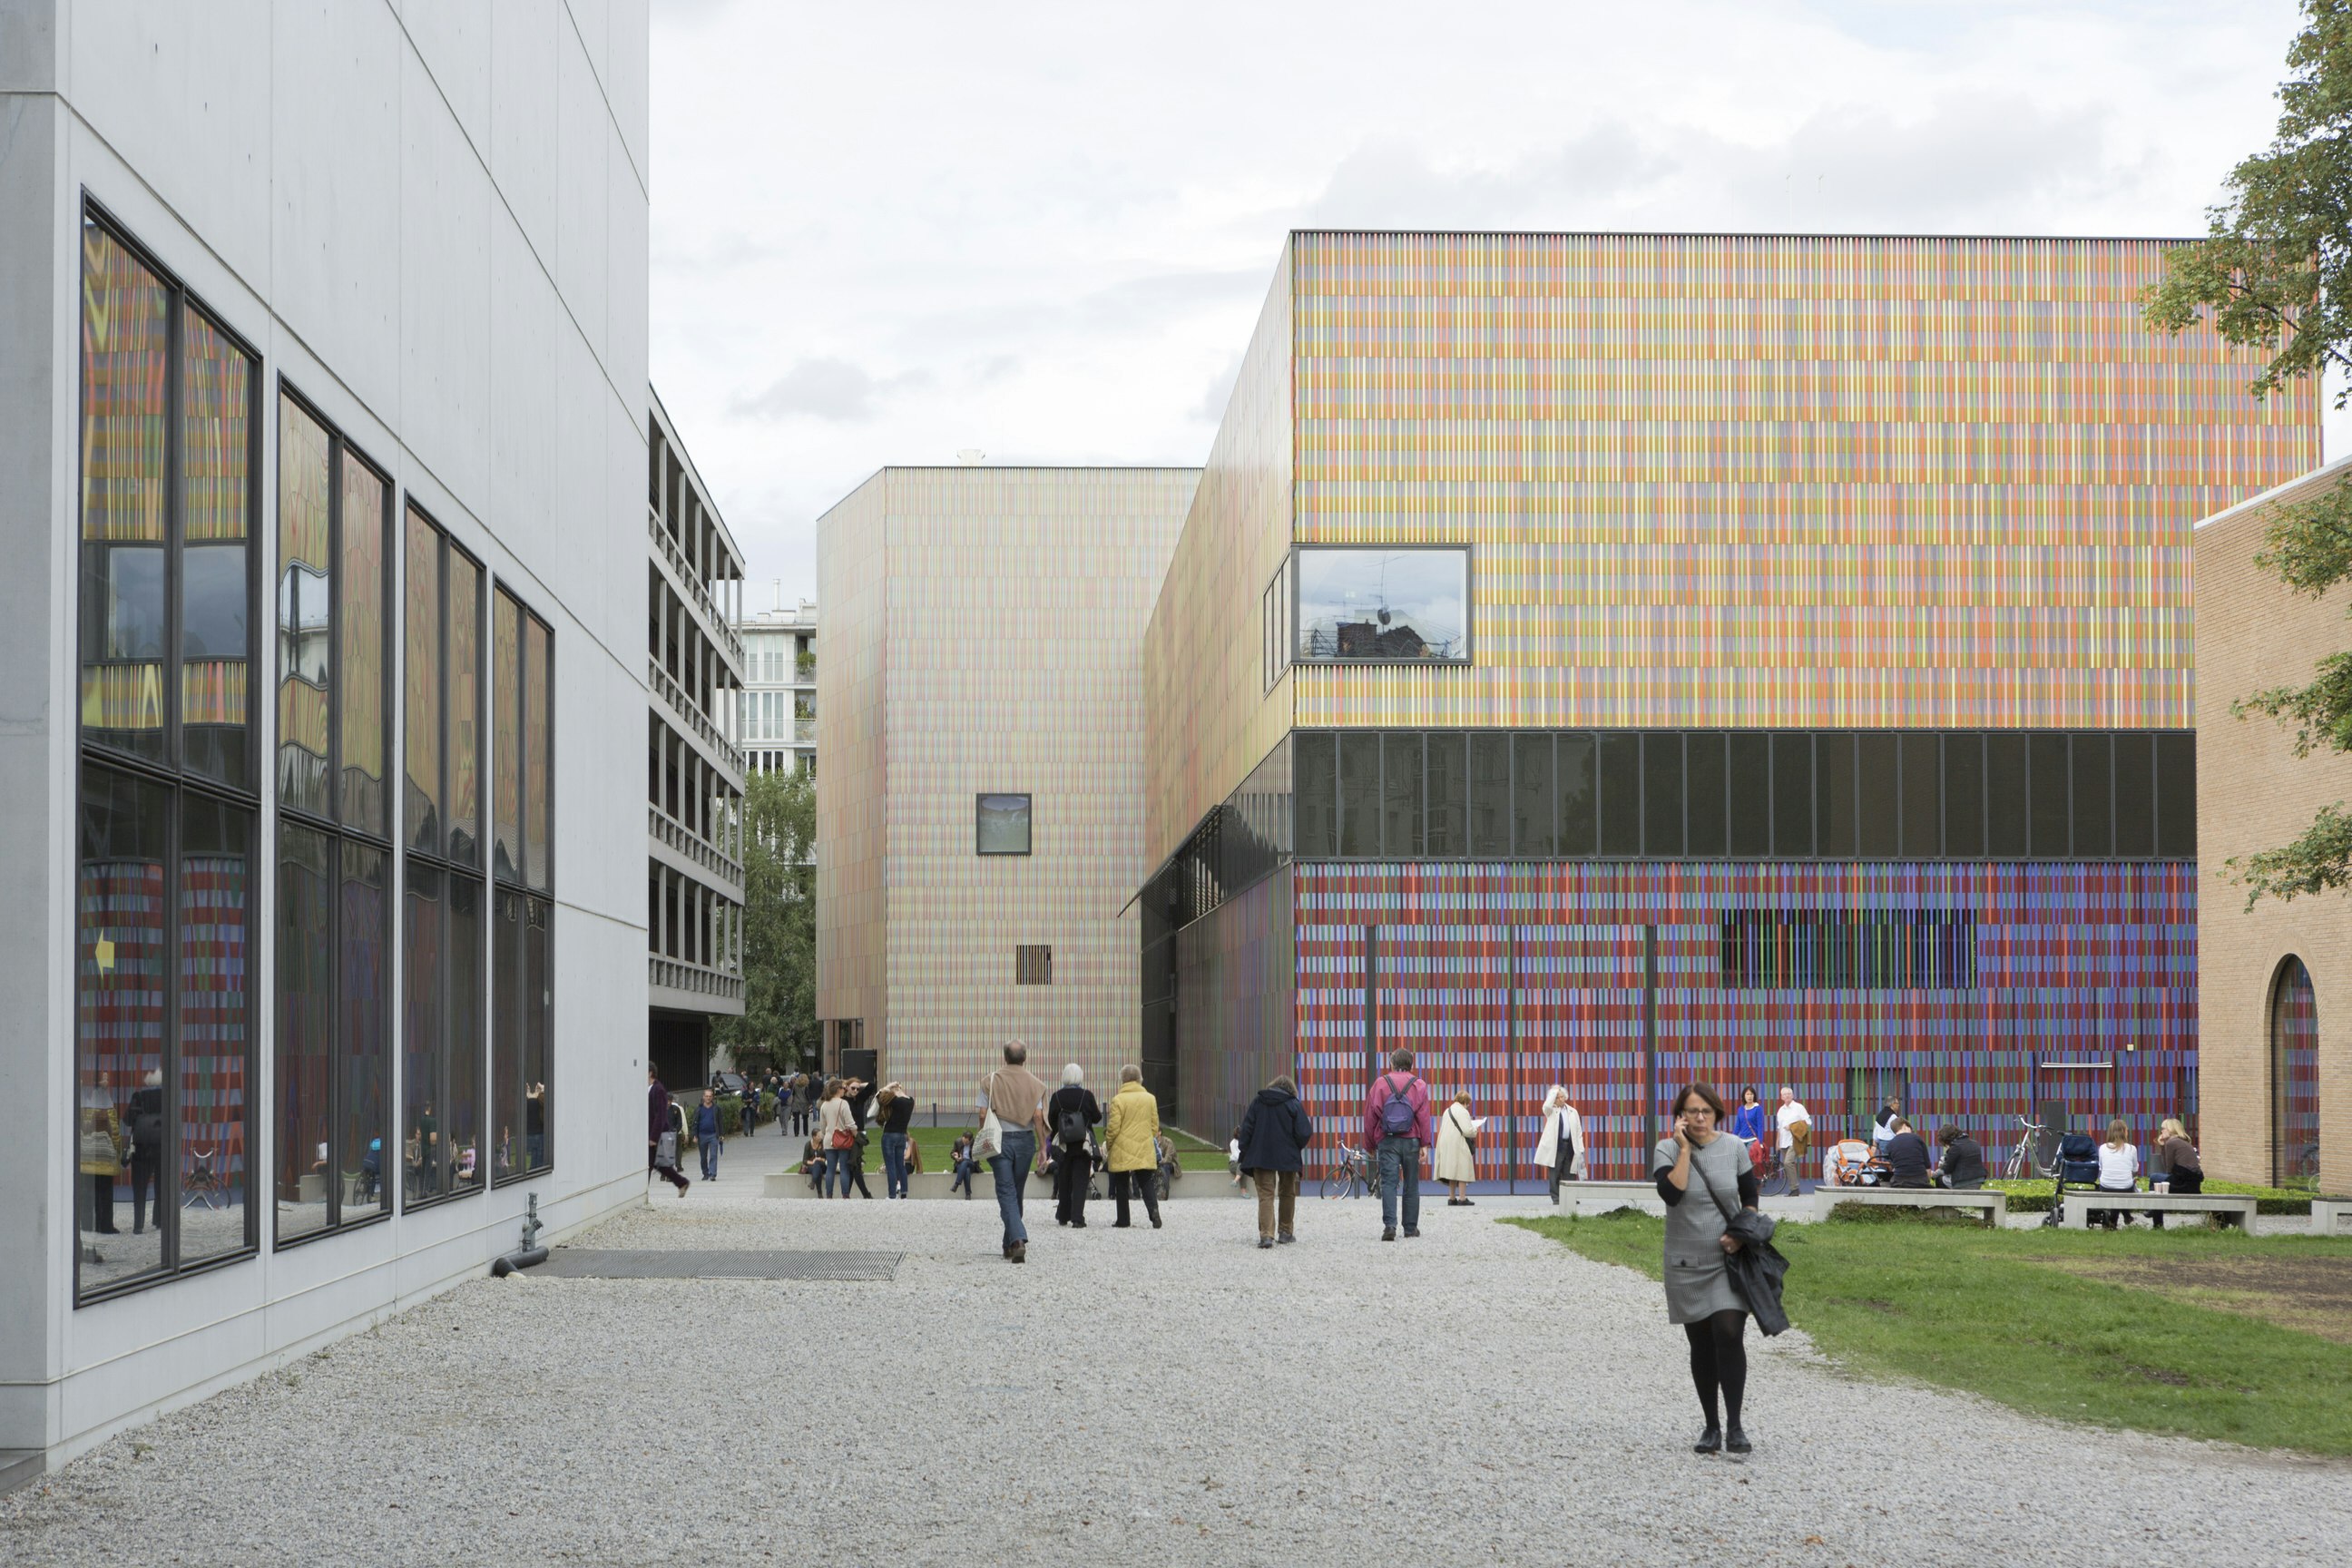 People are milling around in the public realm outside the Museum Brandhorst. The striking modern building is shaped like a cube and is covered in rows of multicoloured rods.